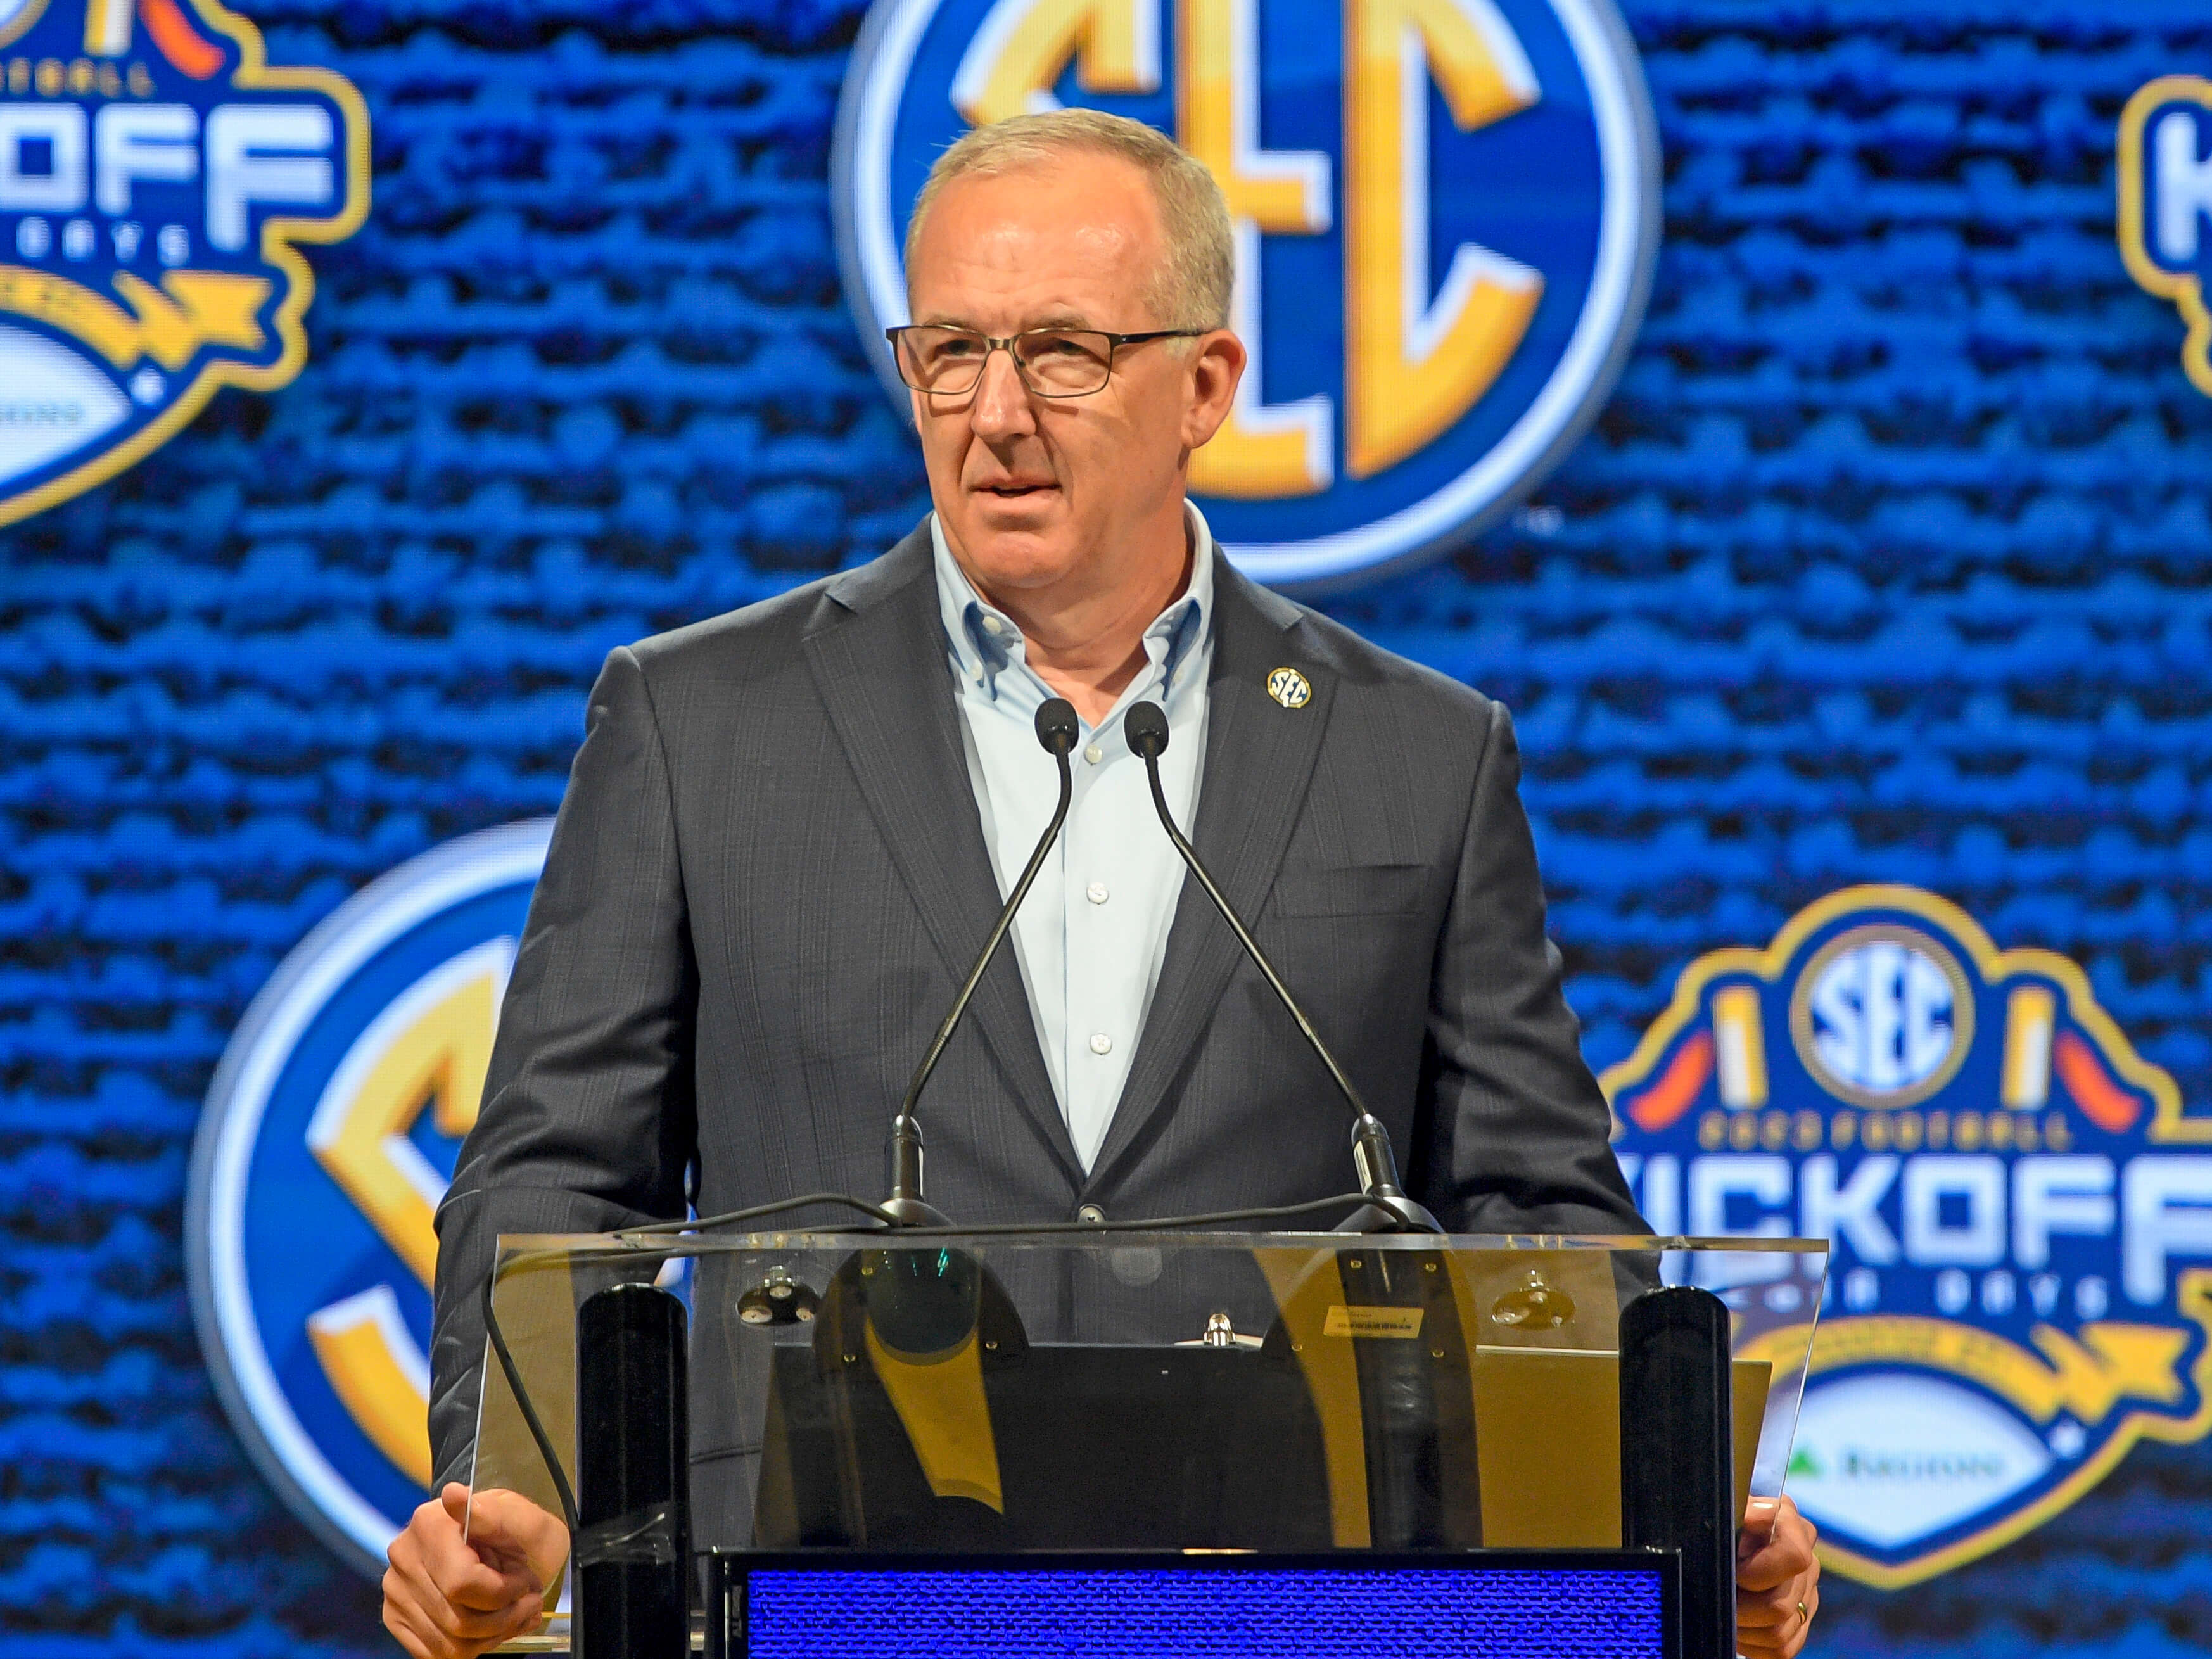 SEC Commissioner Isn’t Ready for Conference Decision on NCAA’s College Player Prop Ban Push